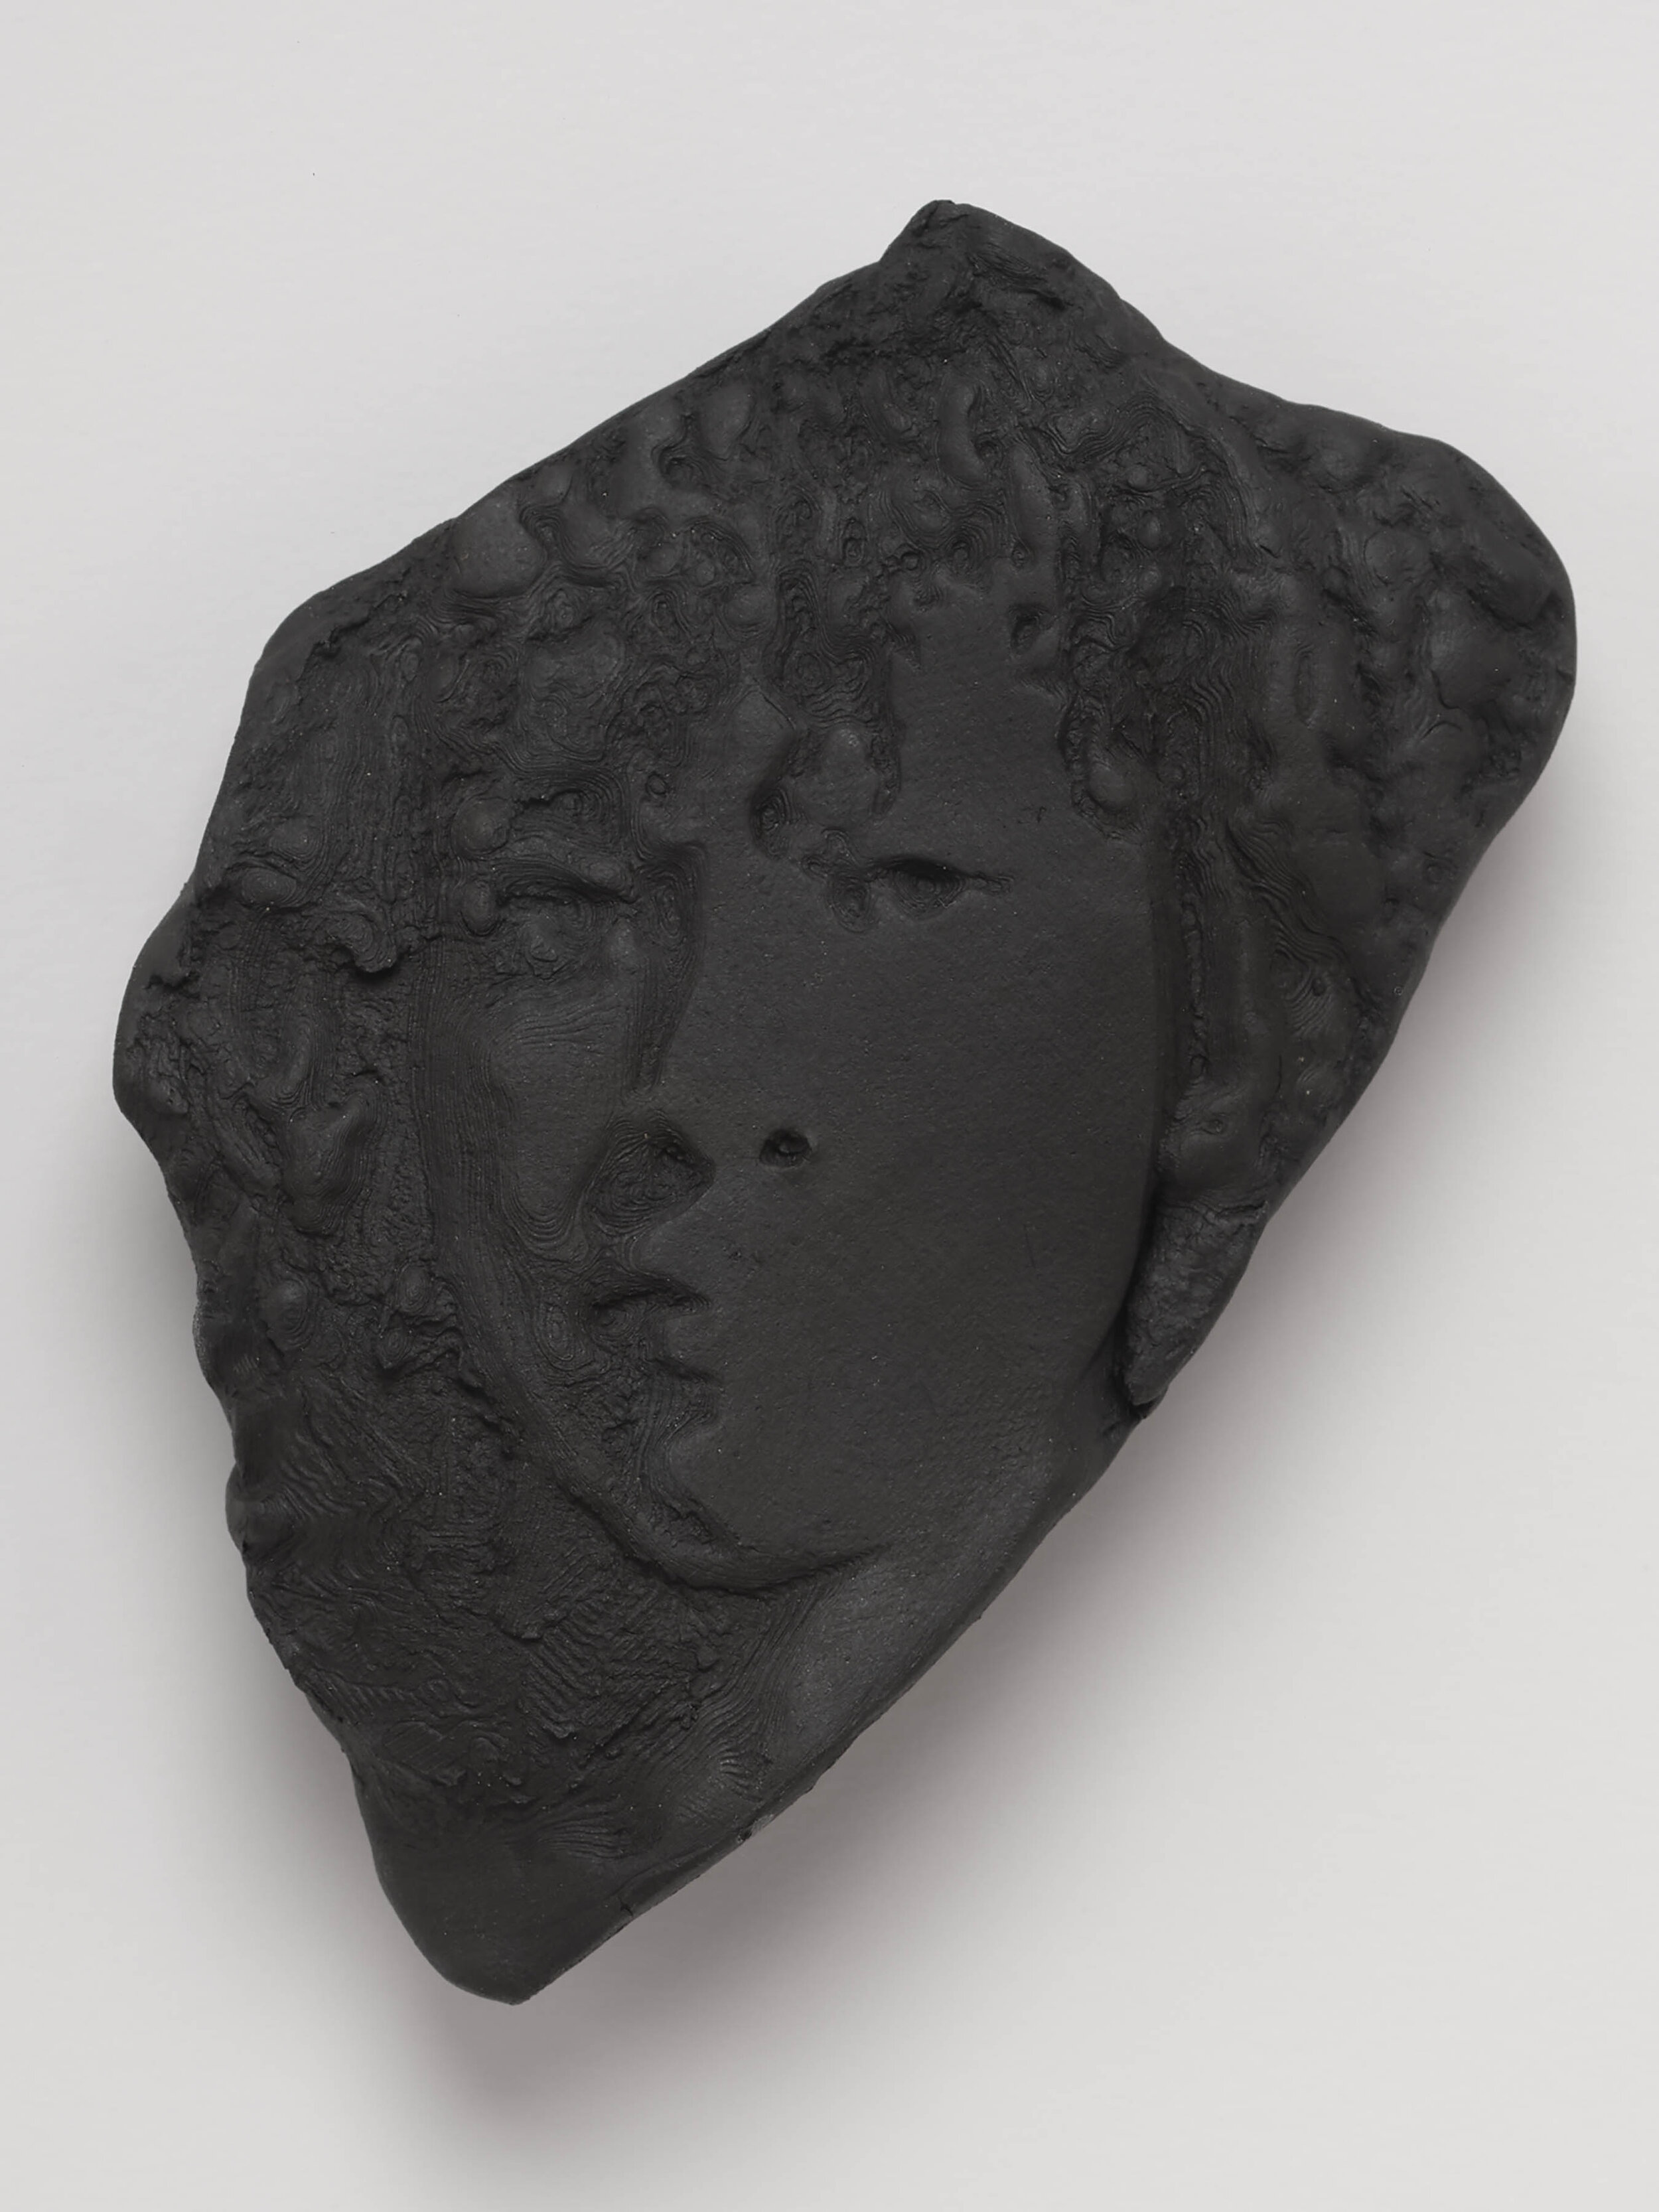  Untitled 02 (Self Portrait), 2020. Cassius Obsidian clay, unique in a series.   4 ½  x 3 ¾  inches.  Edition of 3.  